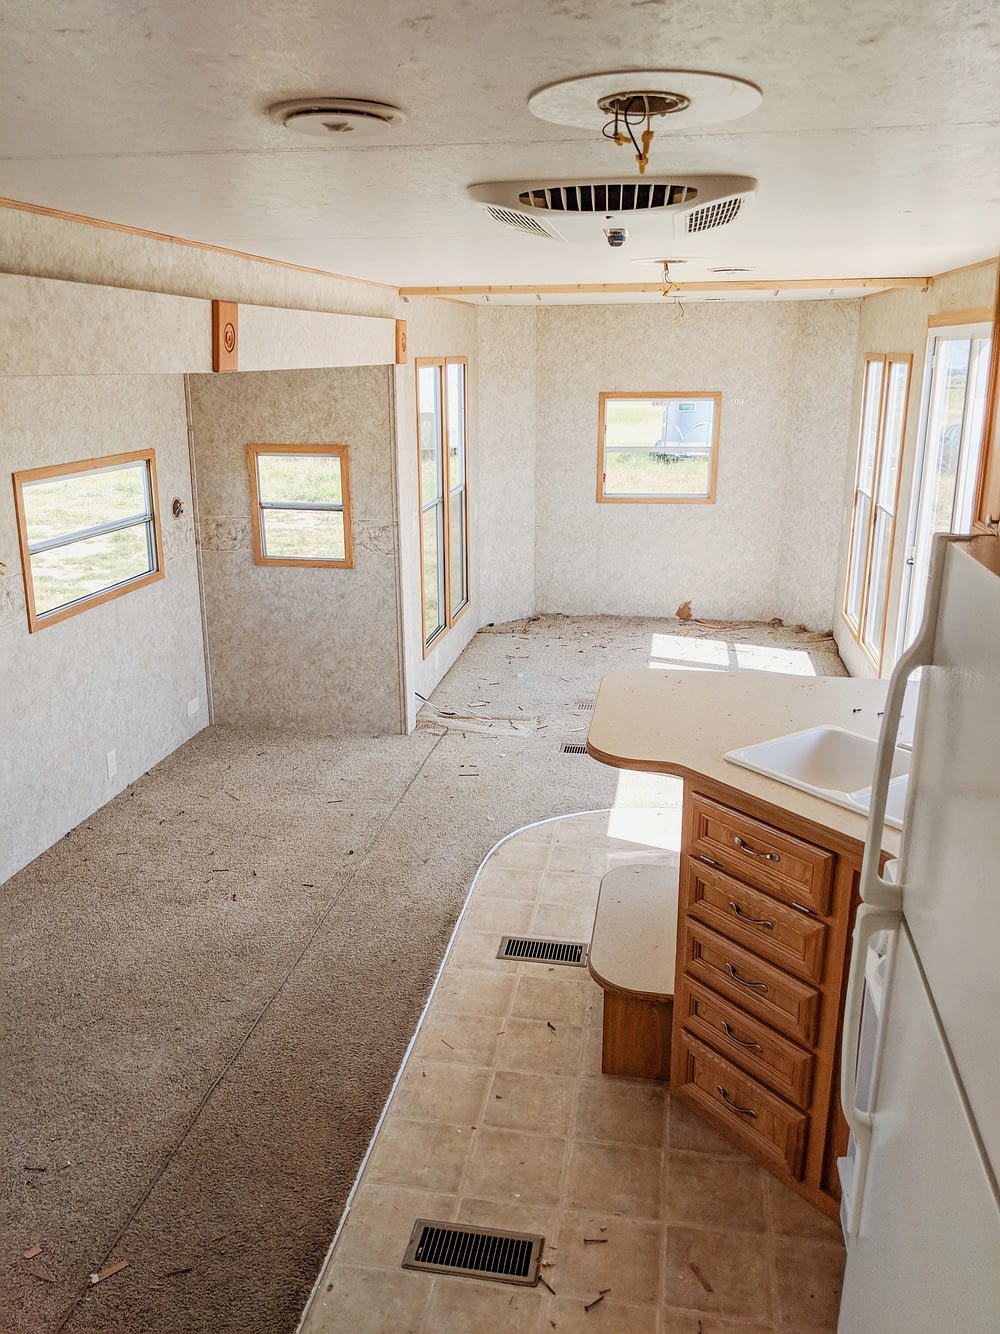 RV mid reno ready to have interior walls painted